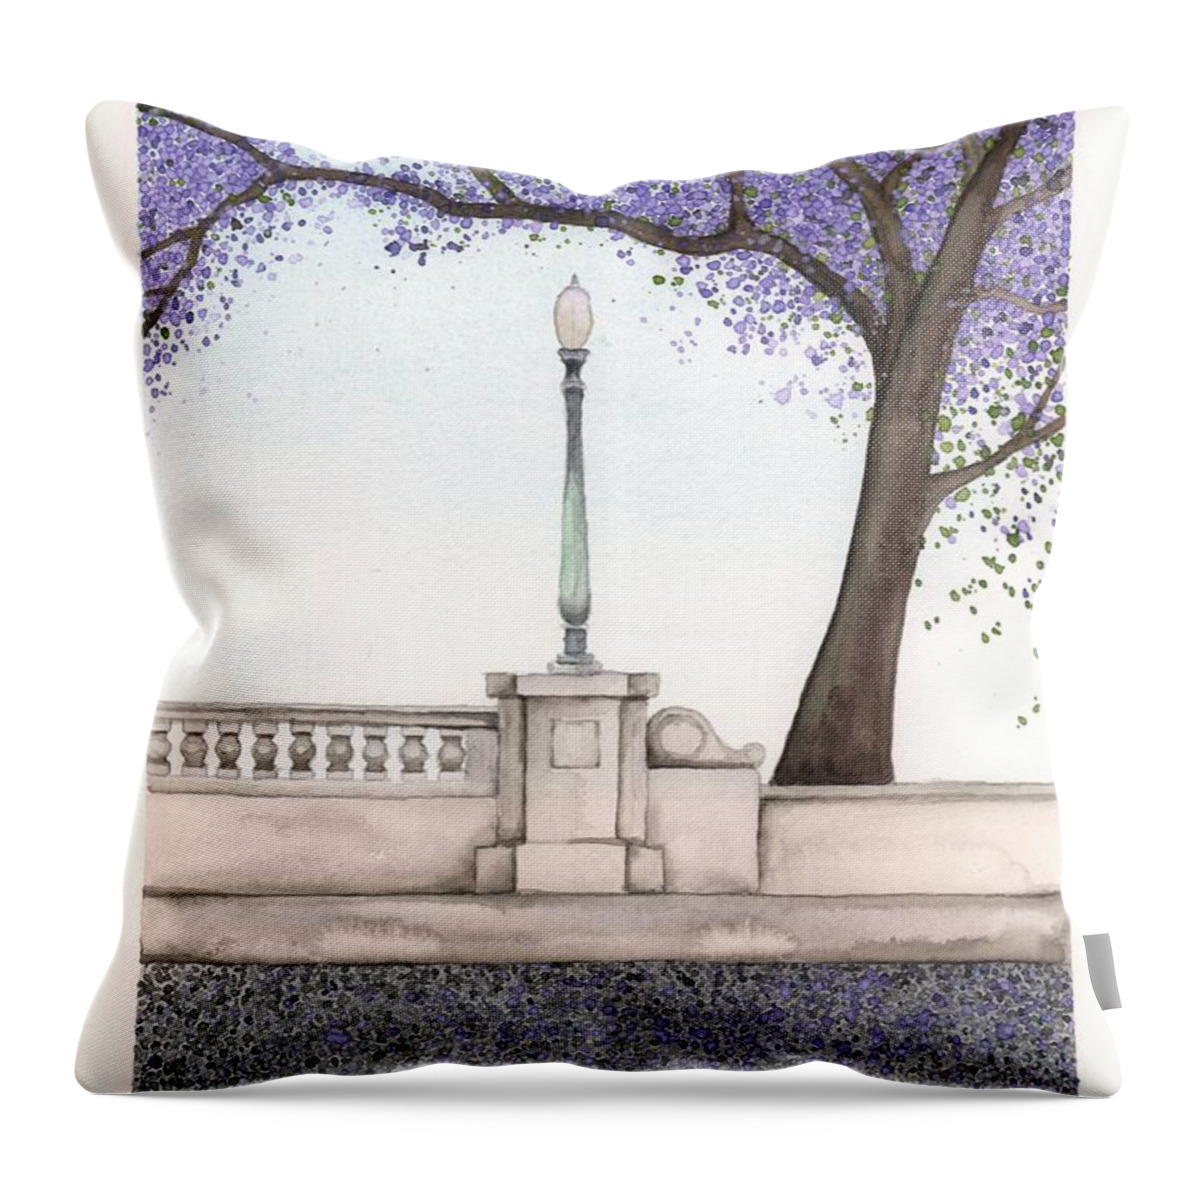 Jacaranda Throw Pillow featuring the painting Hyperion Bridge by Hilda Wagner